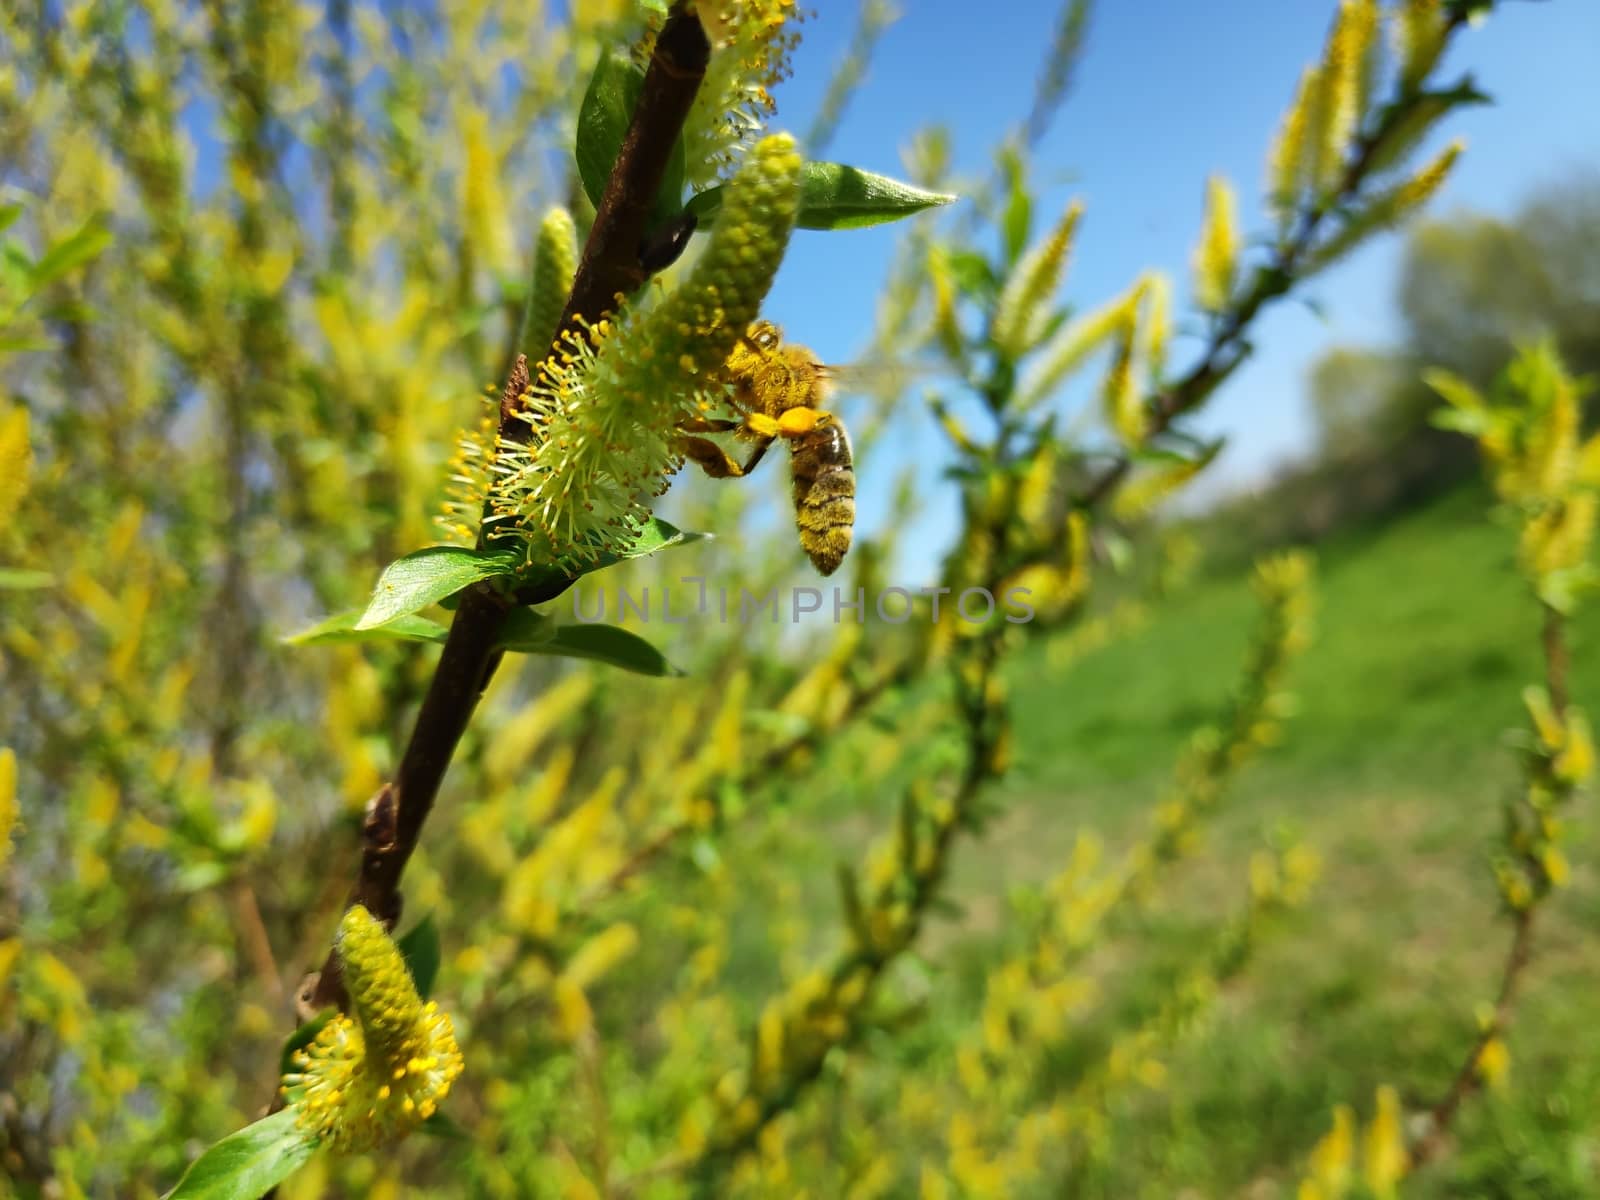 Bee drinking nectar and harvesting pollen on willow tree by pisces2386